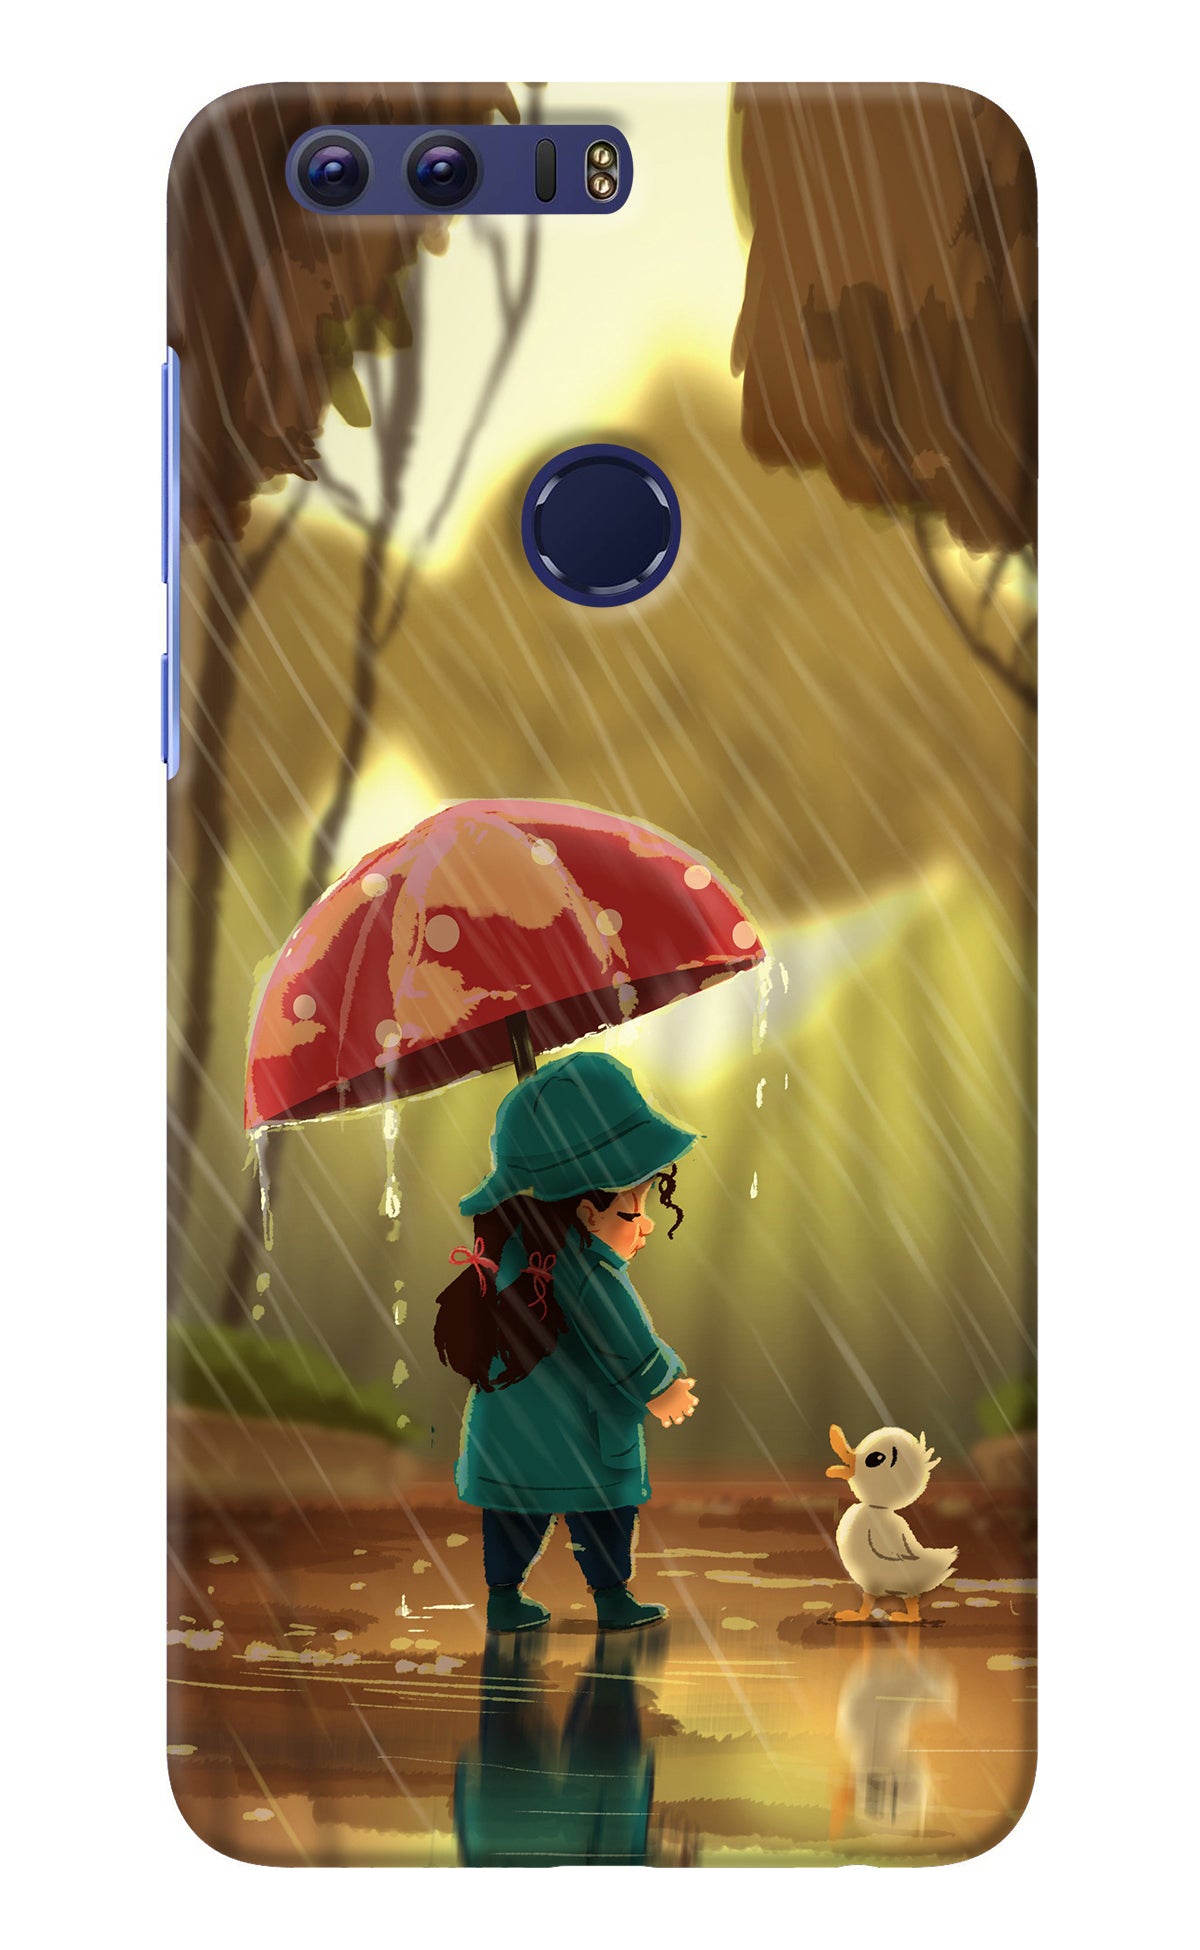 Rainy Day Honor 8 Back Cover